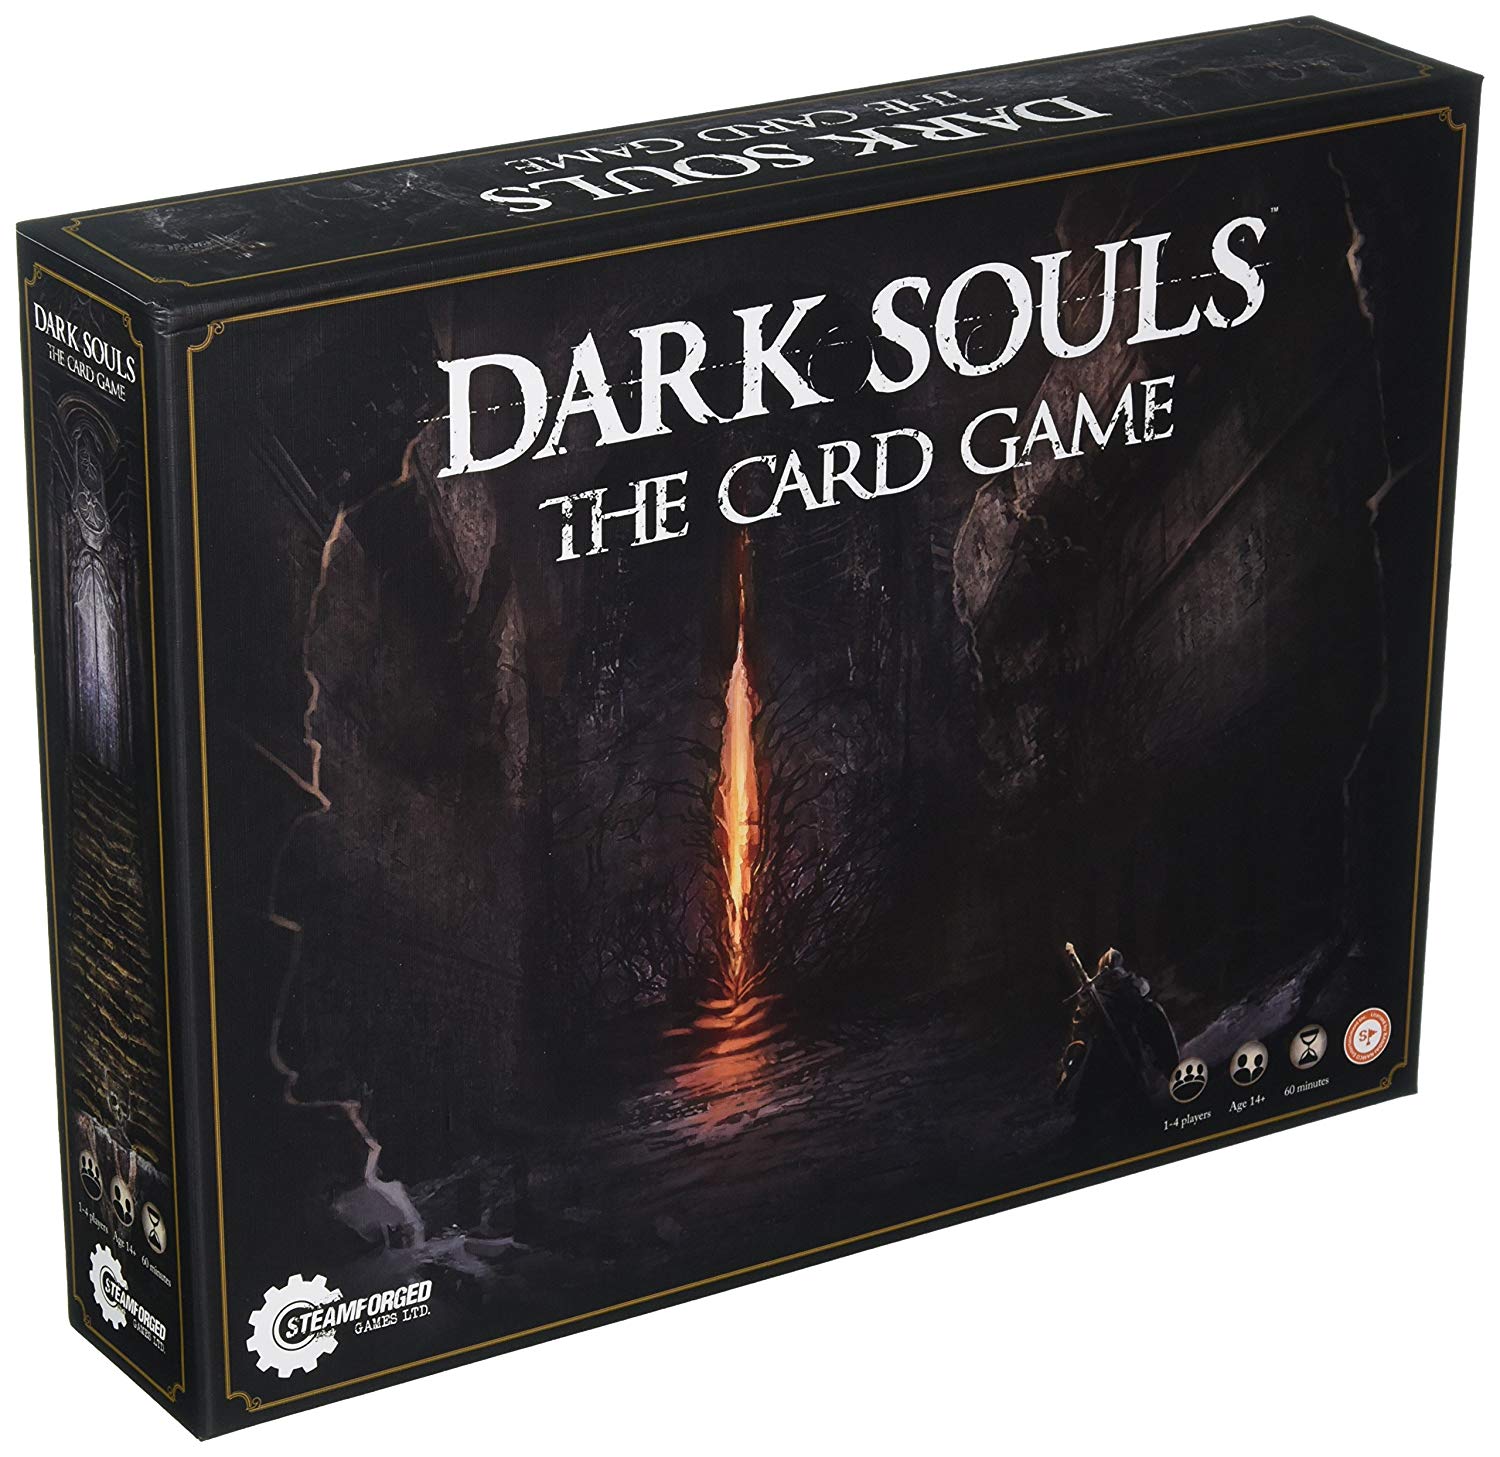 Image for Save on Dark Souls: The Card Game, Legendary and more in the Amazon board games sale